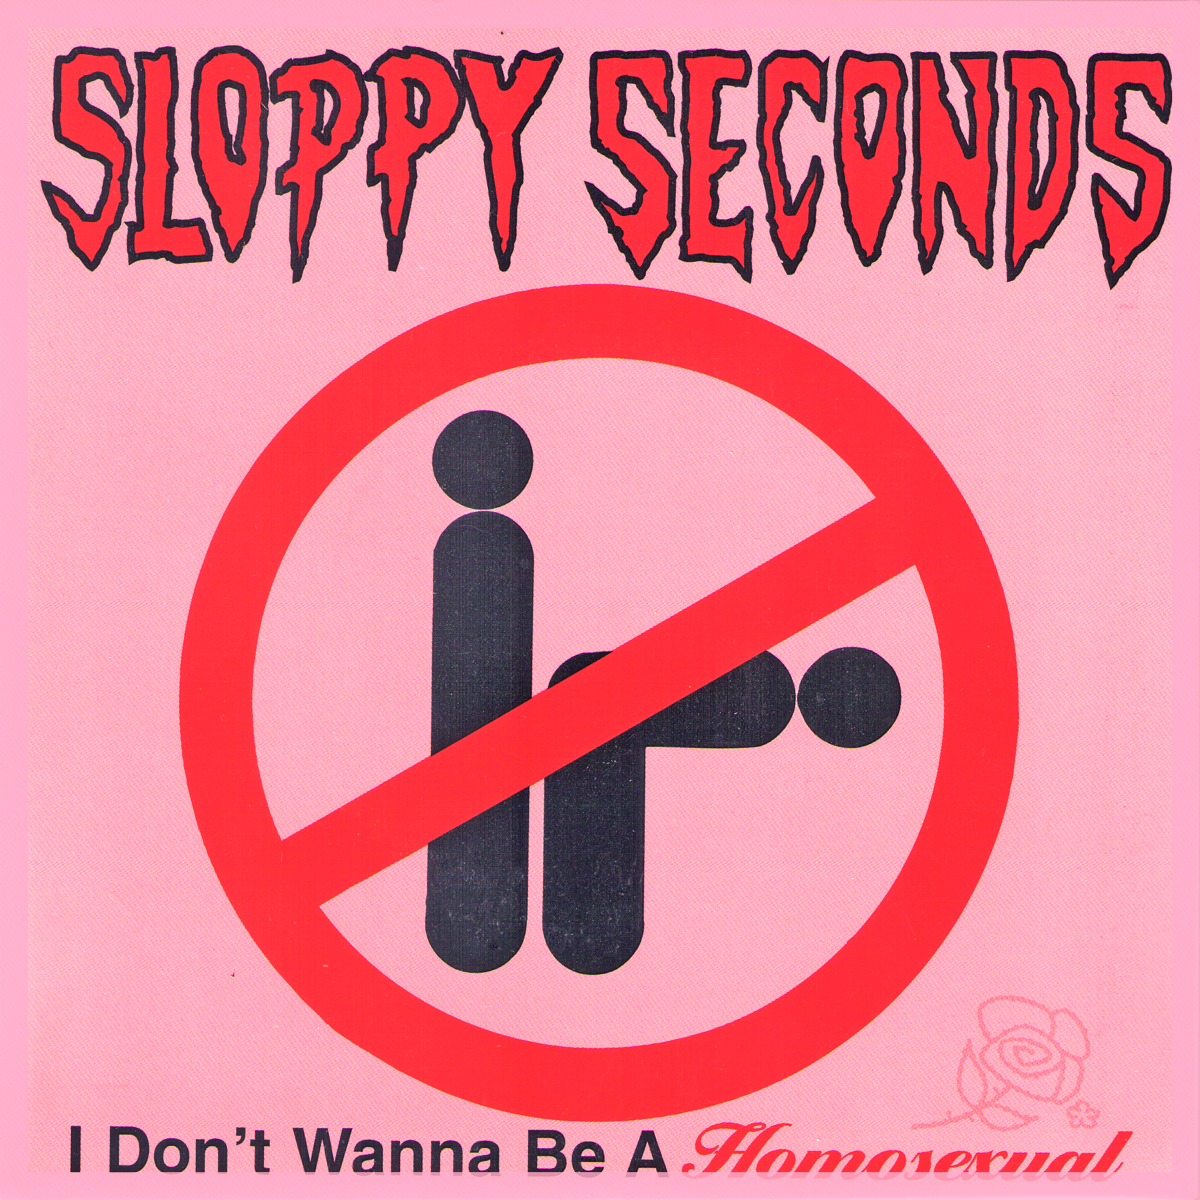 Sloppy Seconds- I Don’t Wanna Be A Homosexual 7" ~REISSUE / RARE HOT PINK WAX!